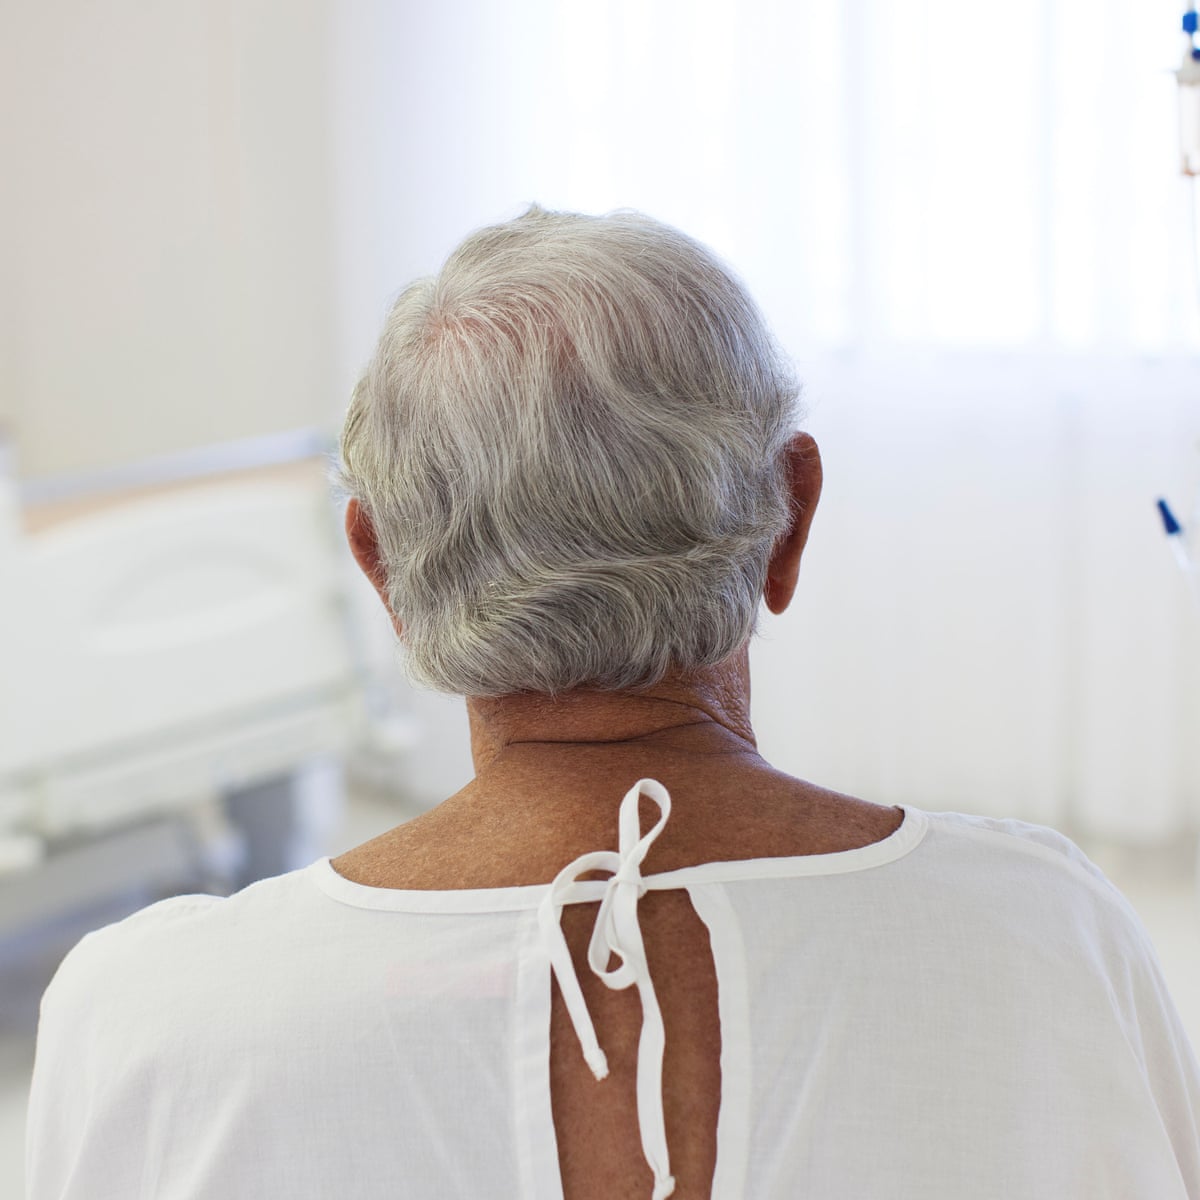 Cancer patients' grey hair unexpectedly darkens in drug study | Medical  research | The Guardian